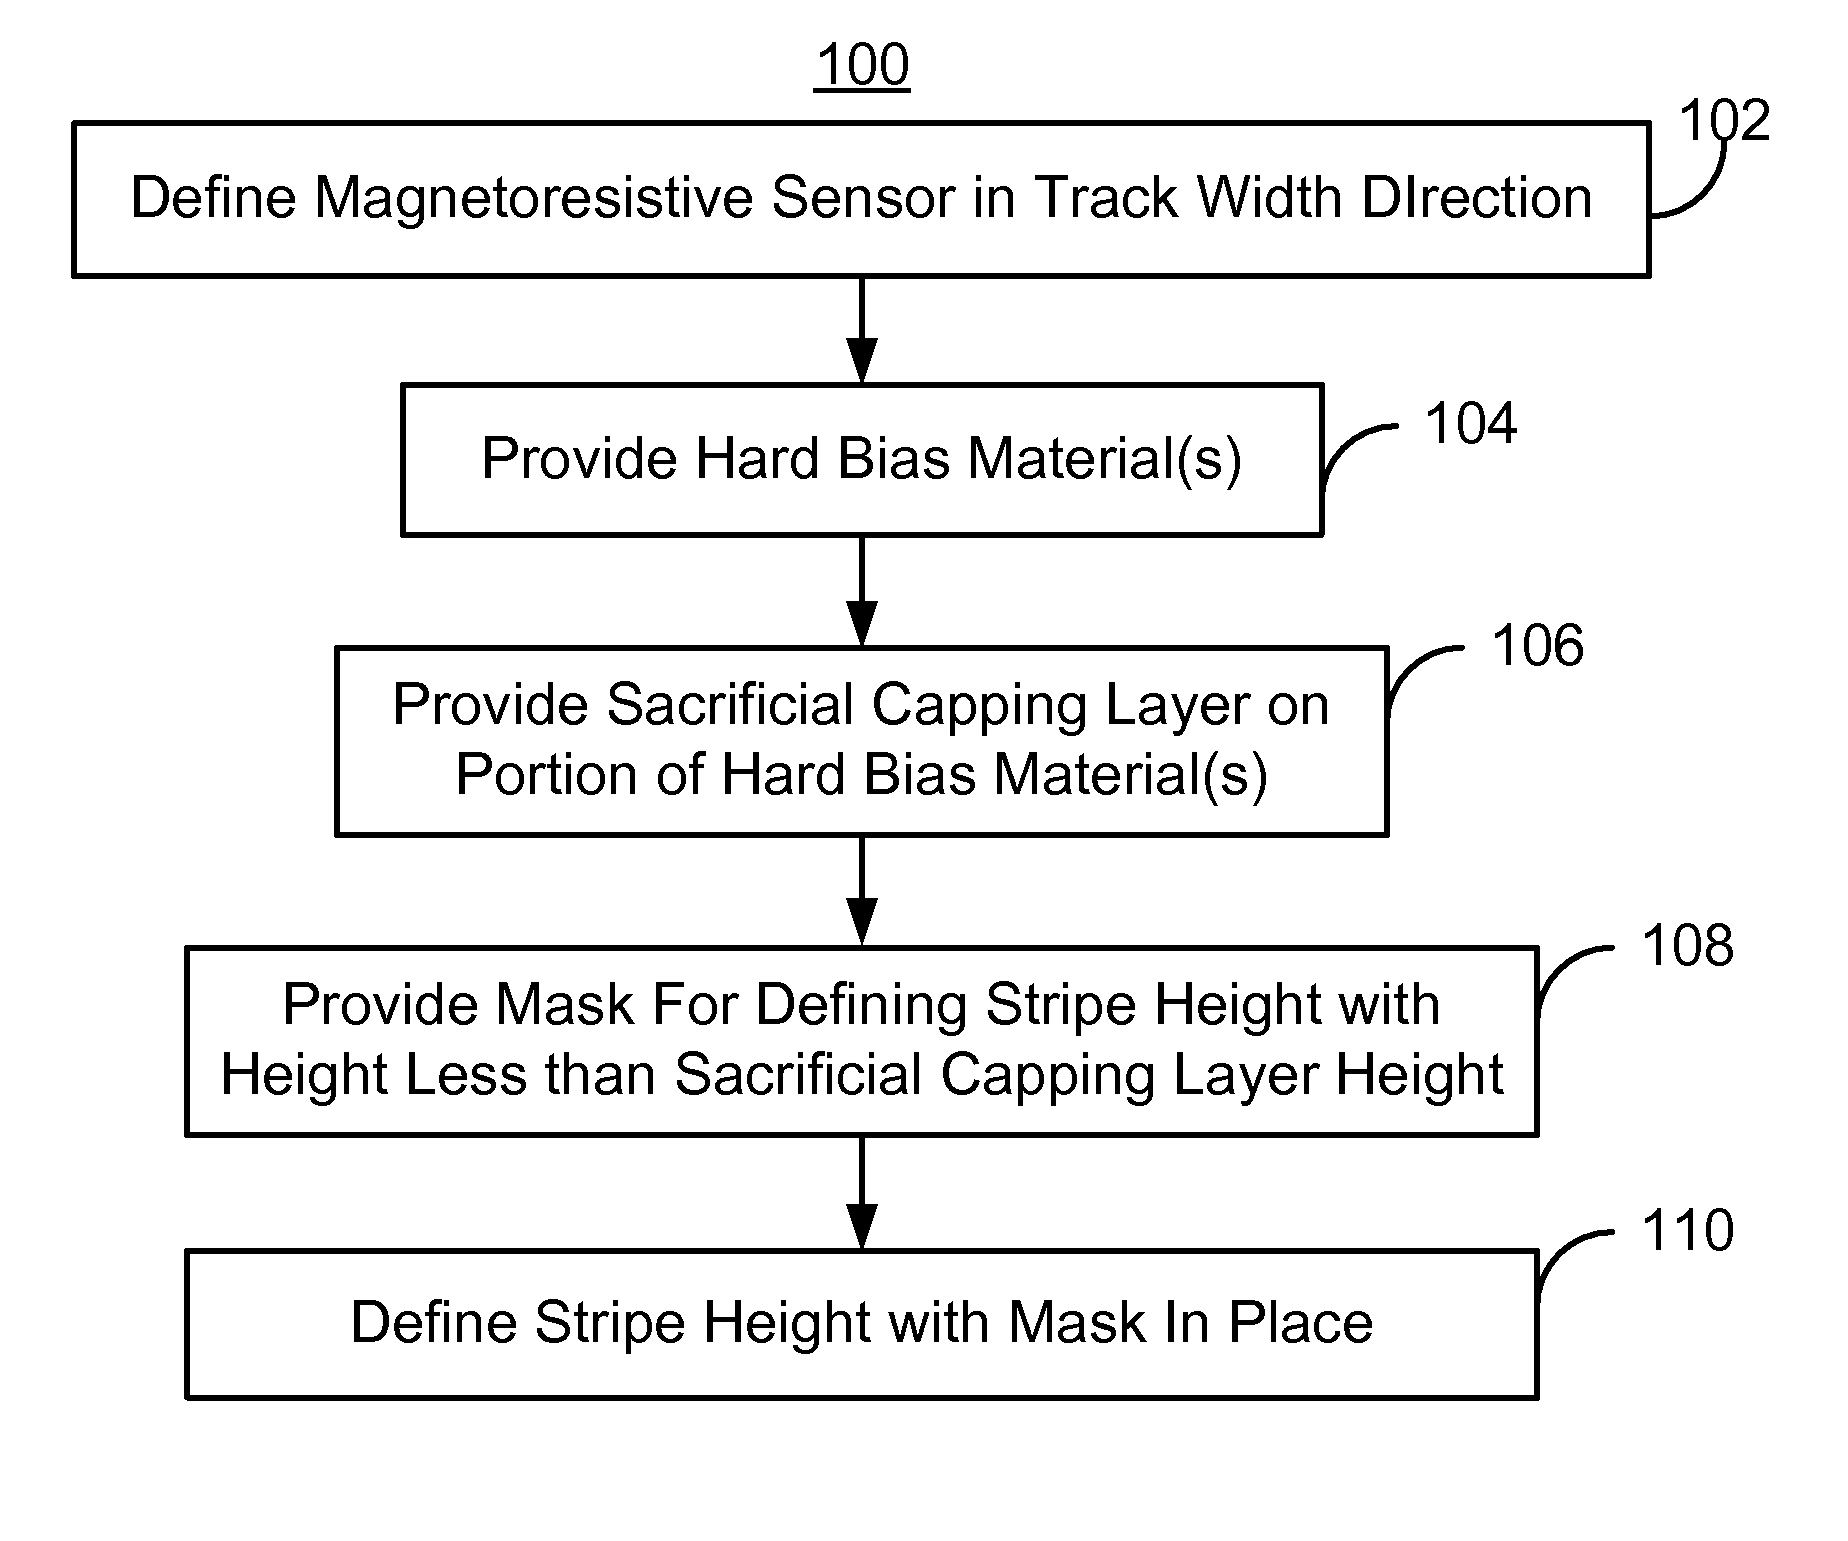 Method and system for providing an improved hard bias structure